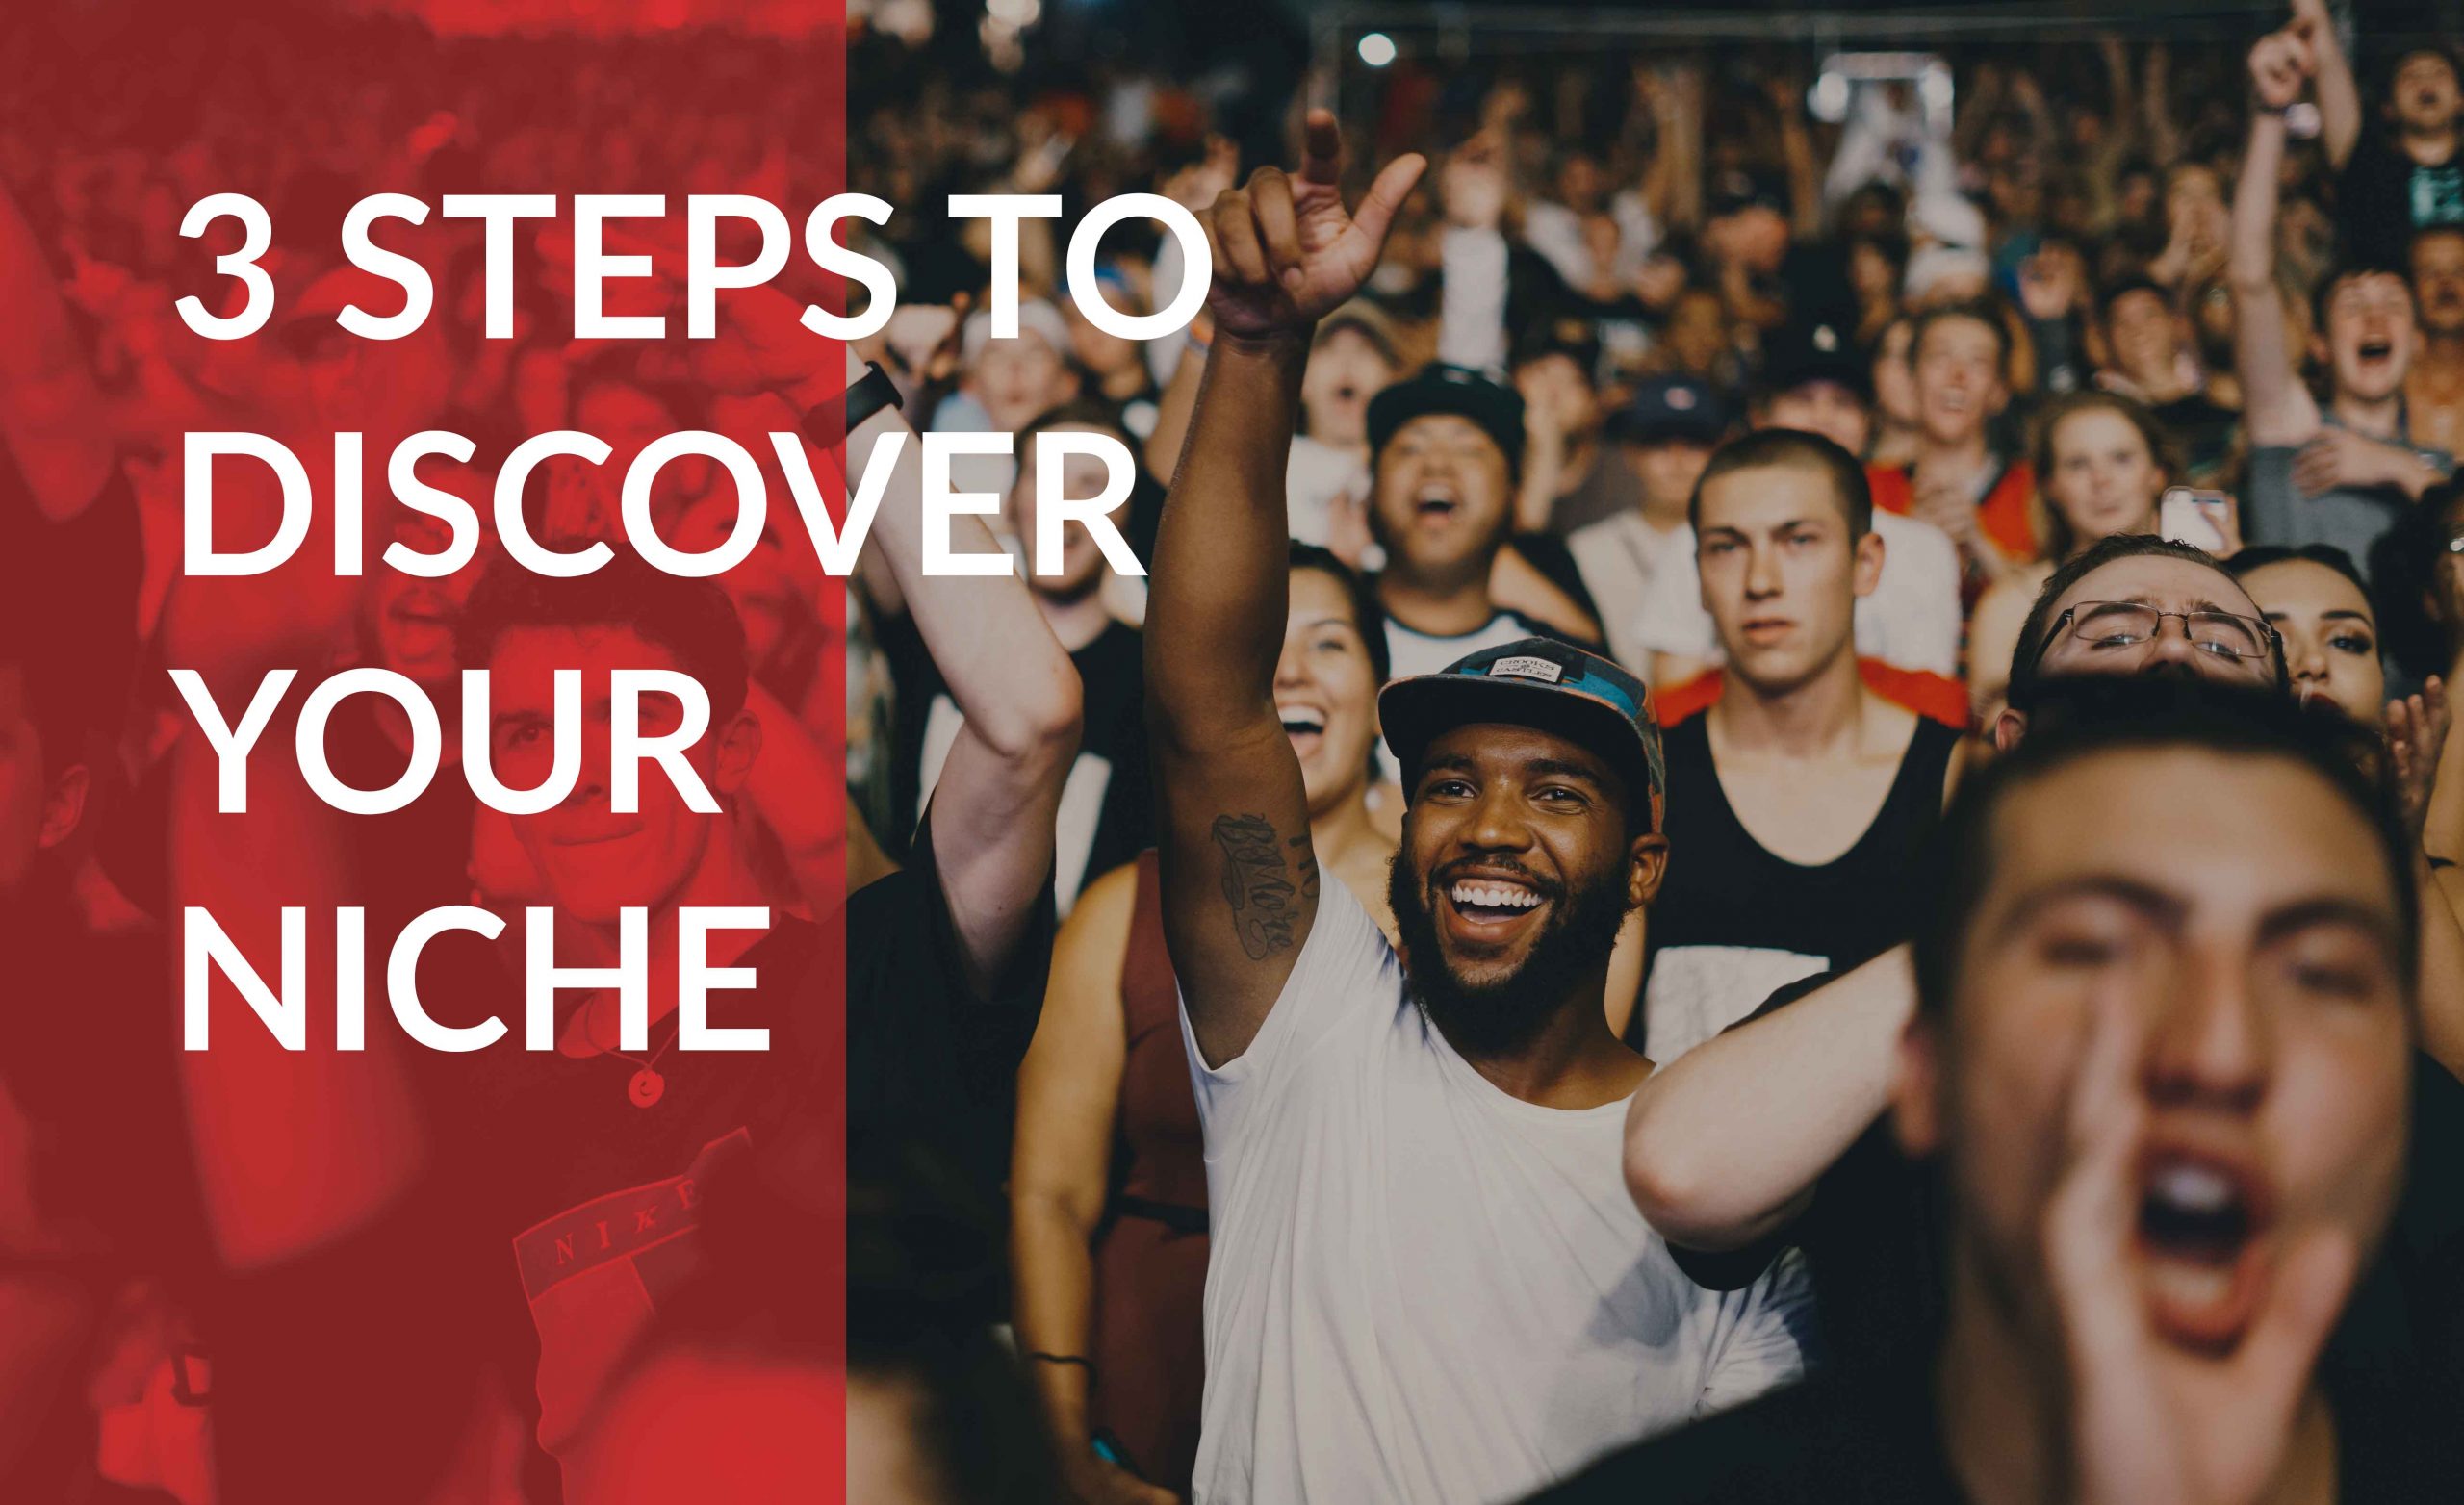 3 important steps to discovering your niche